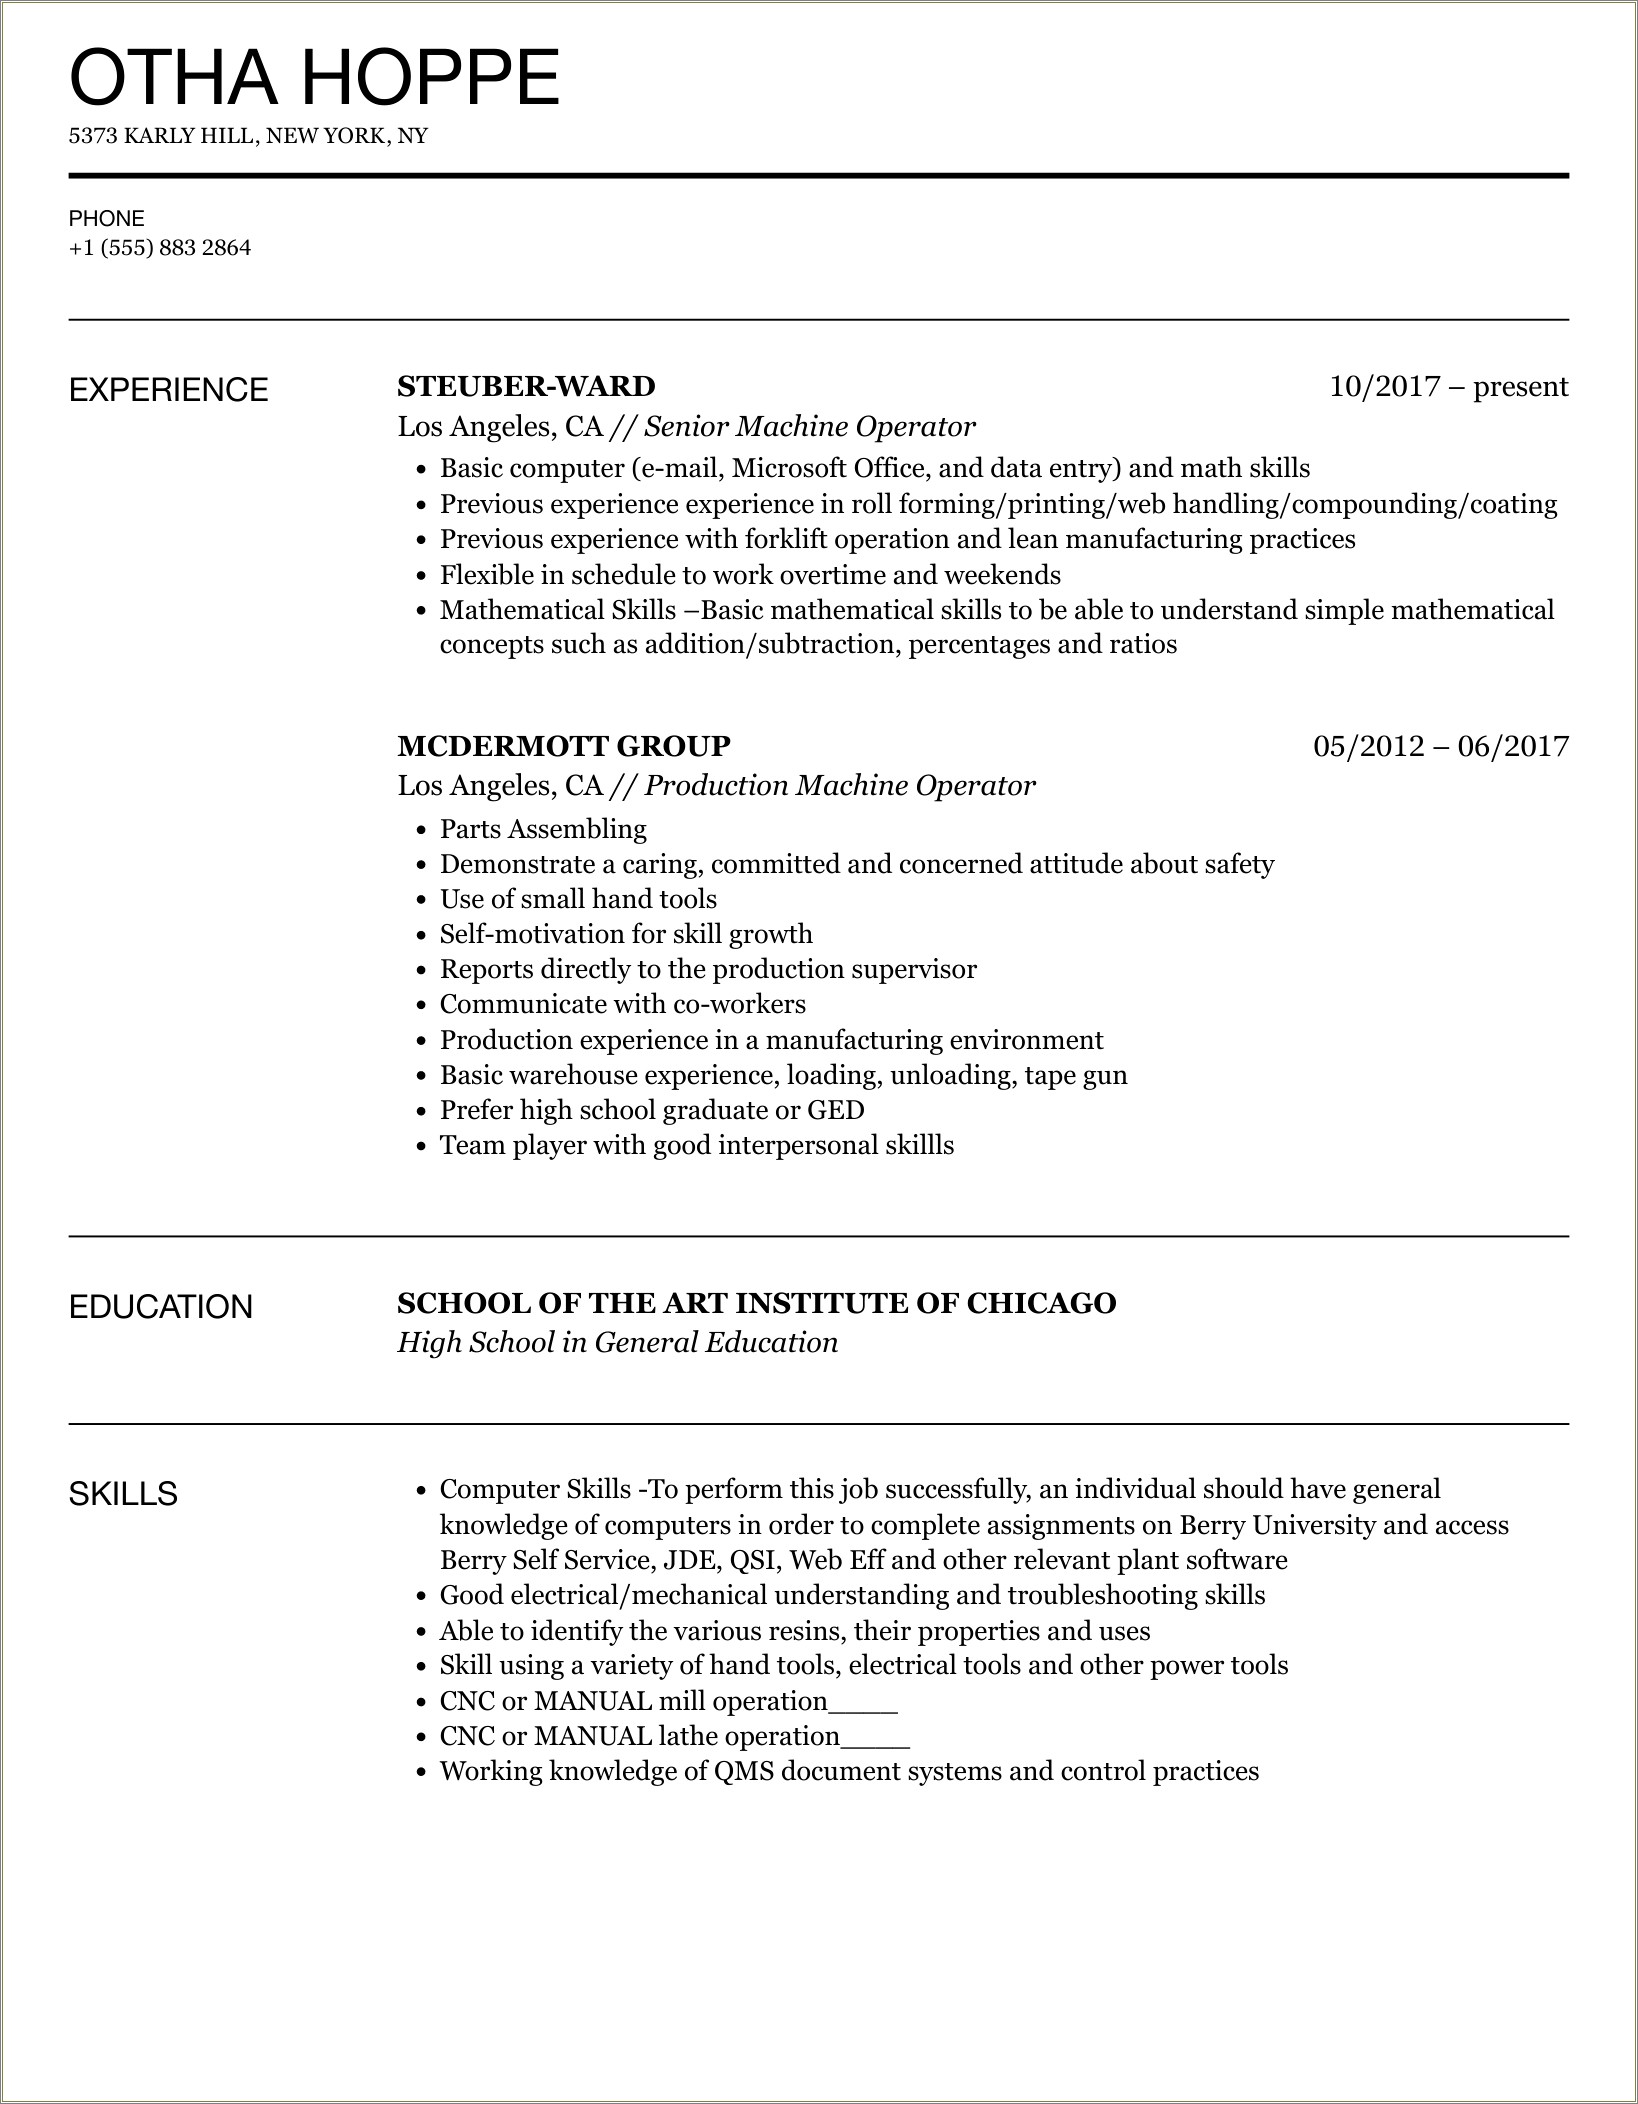 Personal Branding Statement Resume Examples For Operator